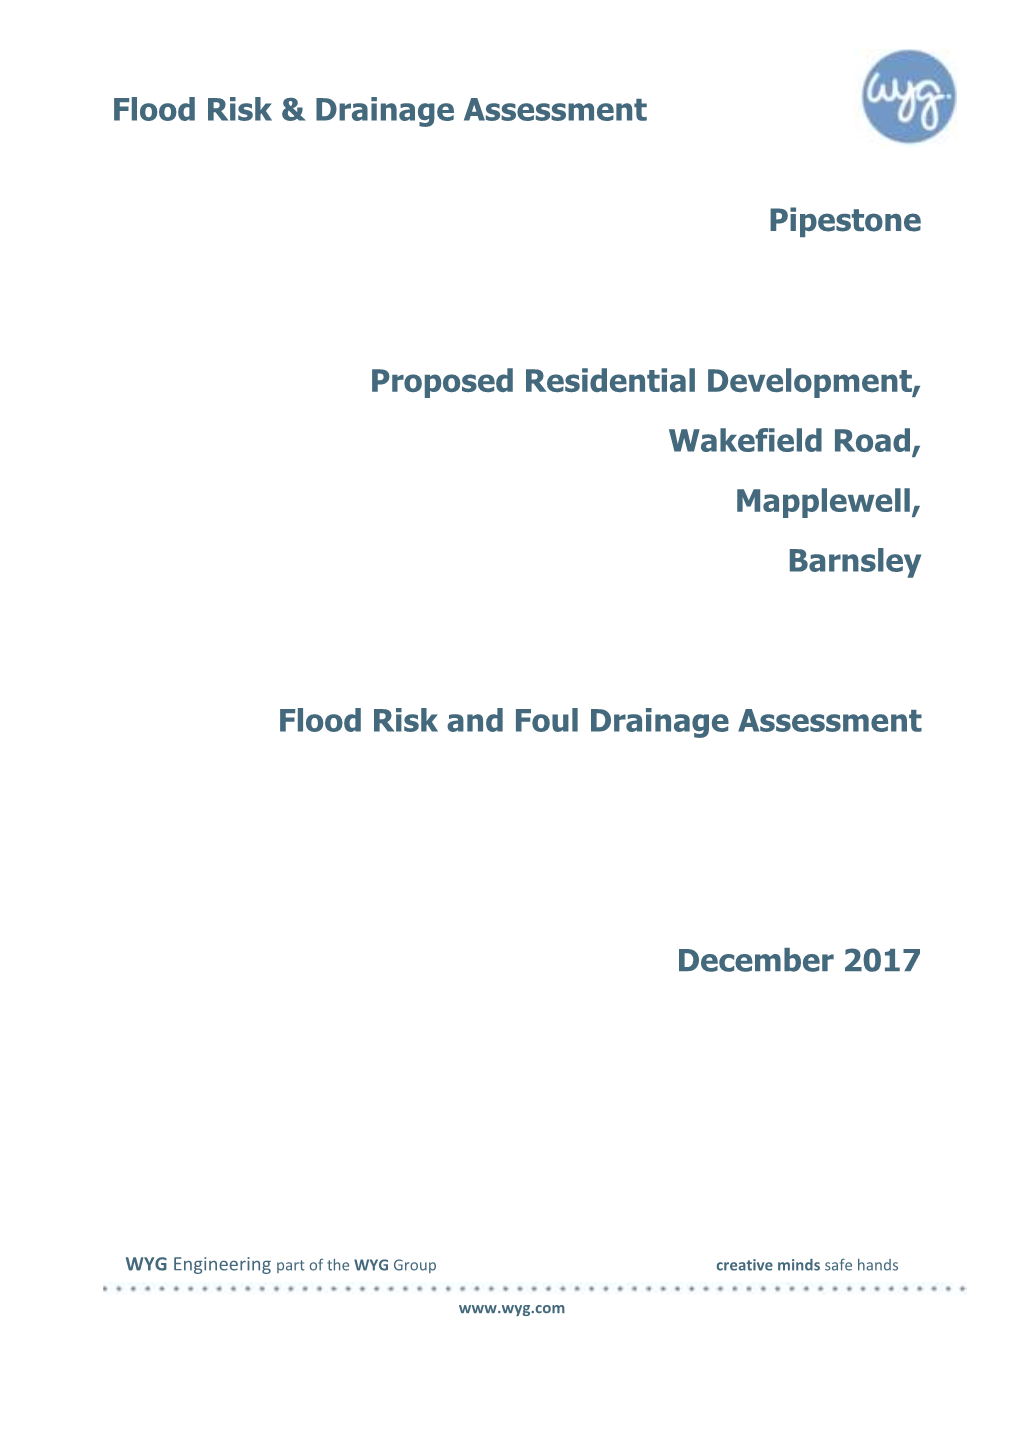 Flood Risk & Drainage Assessment Pipestone Proposed Residential